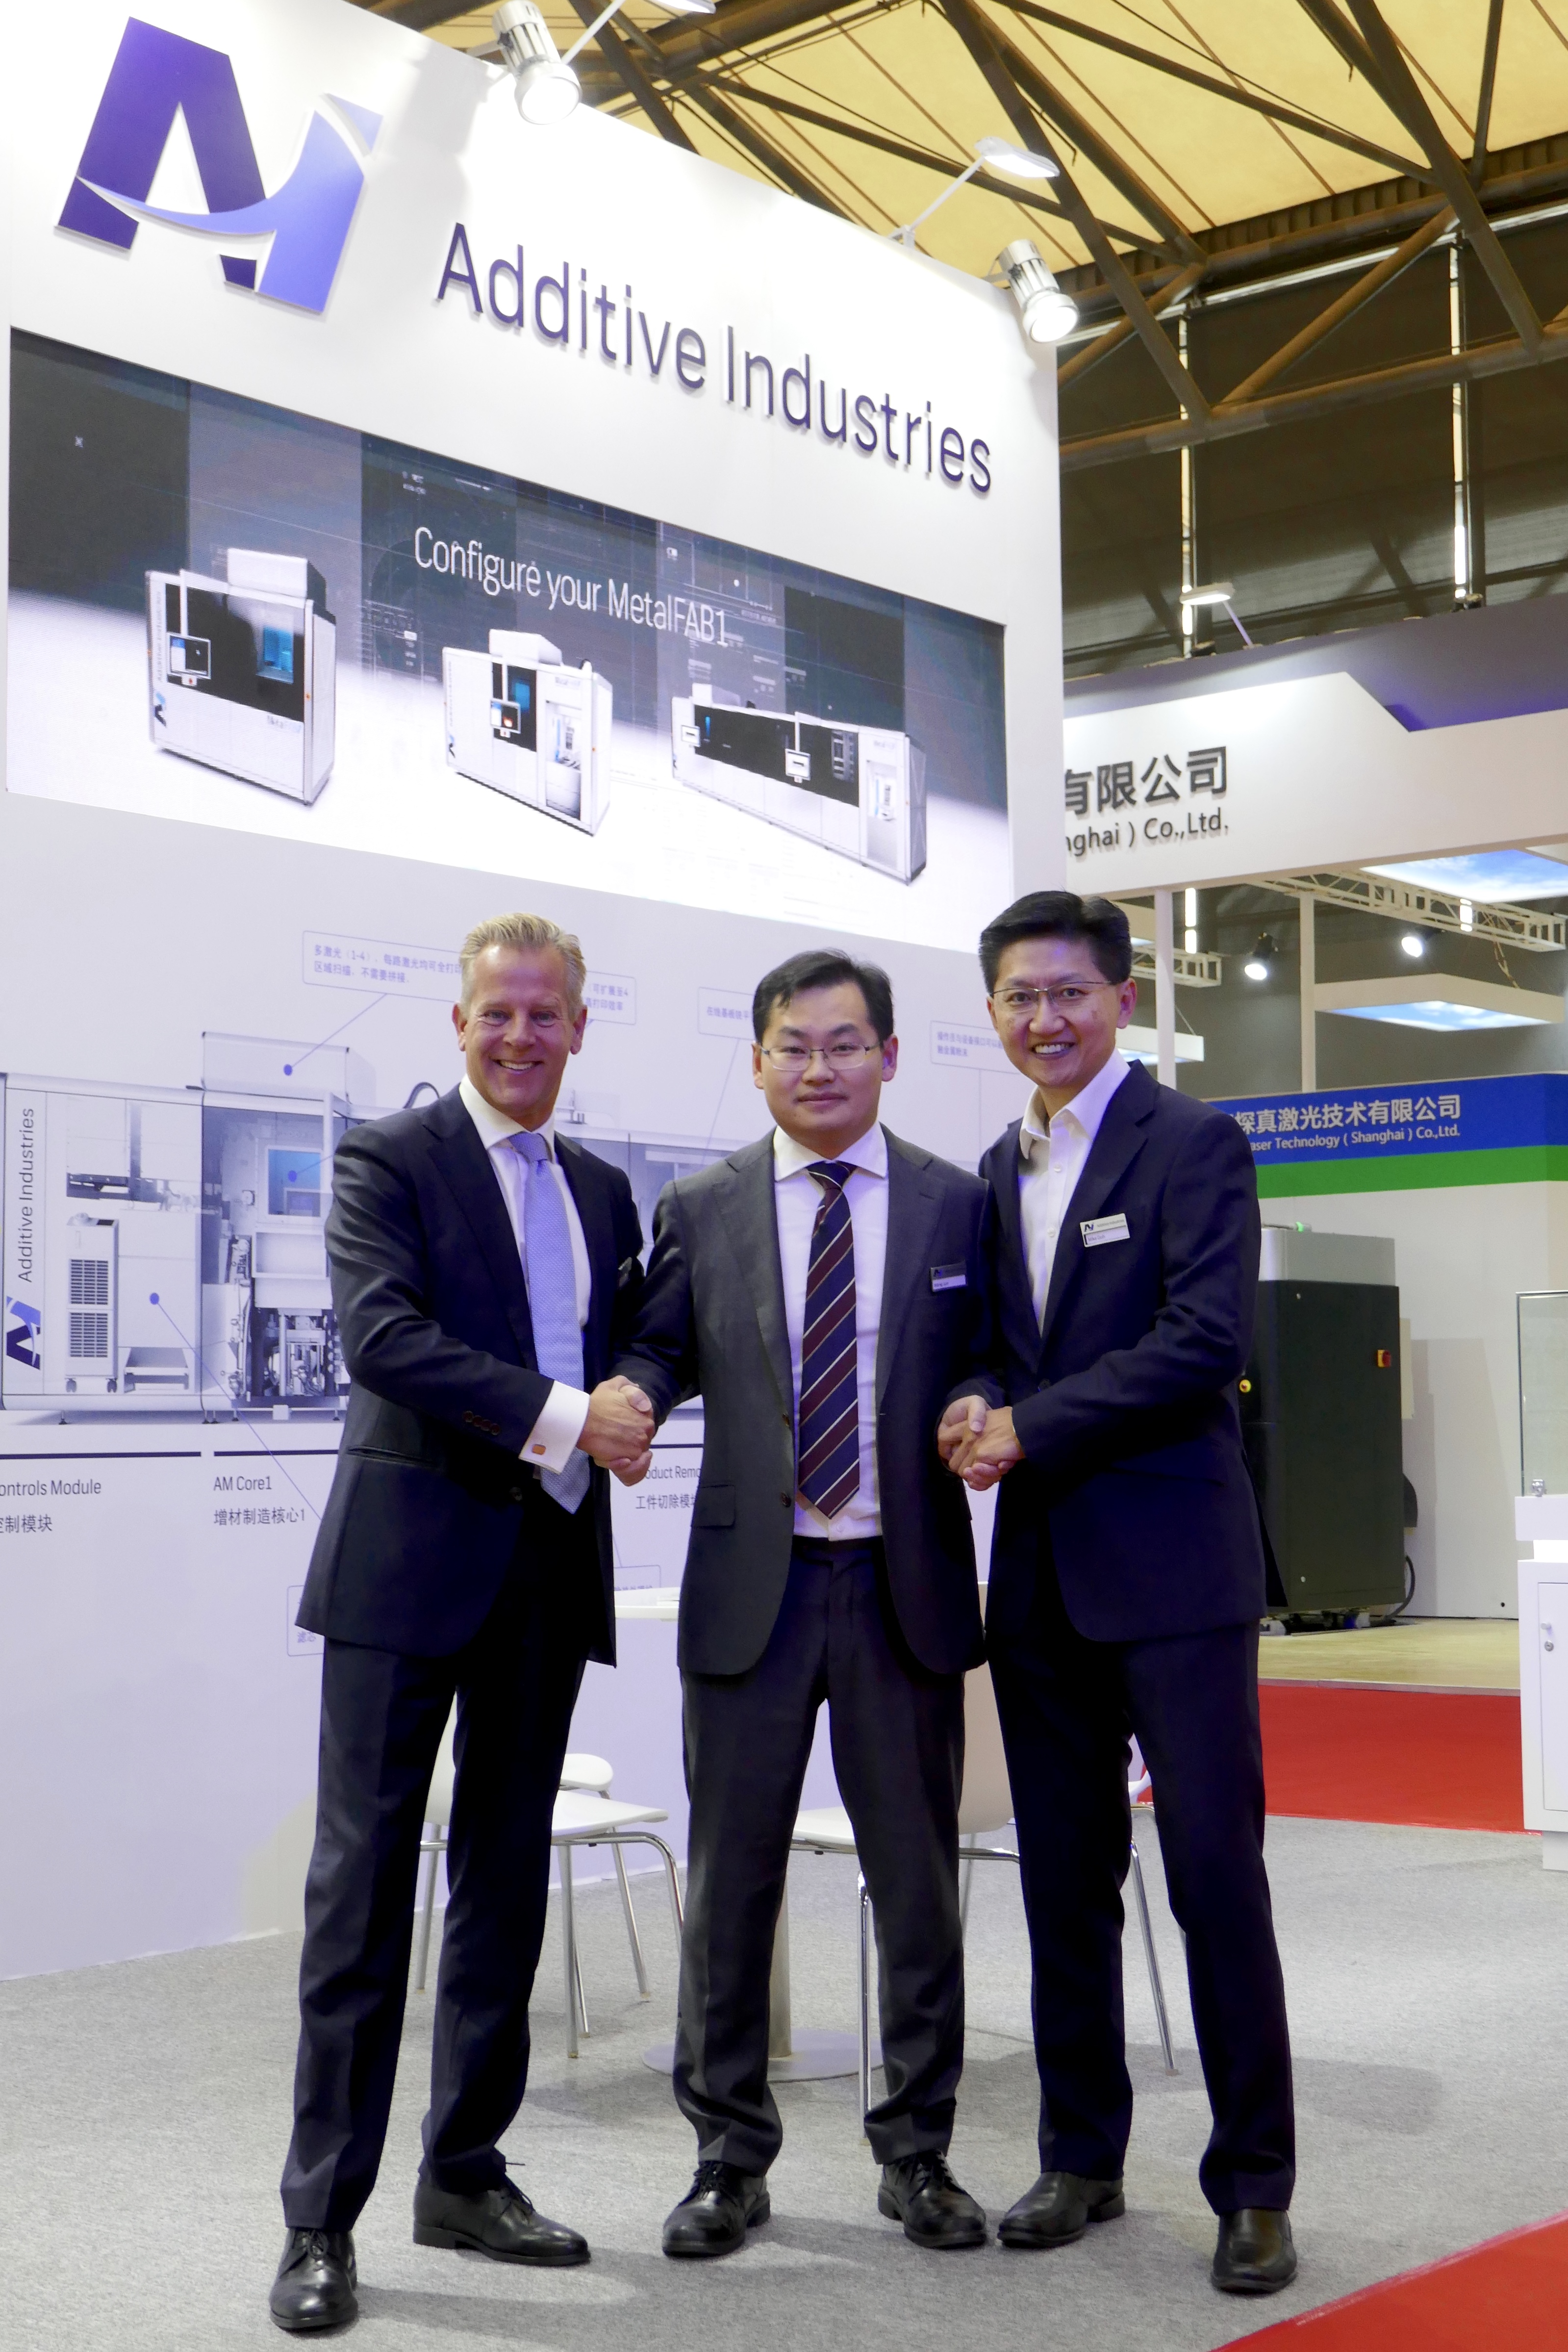 Picture of the new partners, from Left to Right: Bart Leferink (Director Global Channel Sales, Additive Industries), Wang Jun (General Manager, Sinsun-Tech Corporation Ltd.) and Mike Goh (General Manager, Additive Industries Asia Pacific Pte. Ltd.) Photo via Additive Industries.